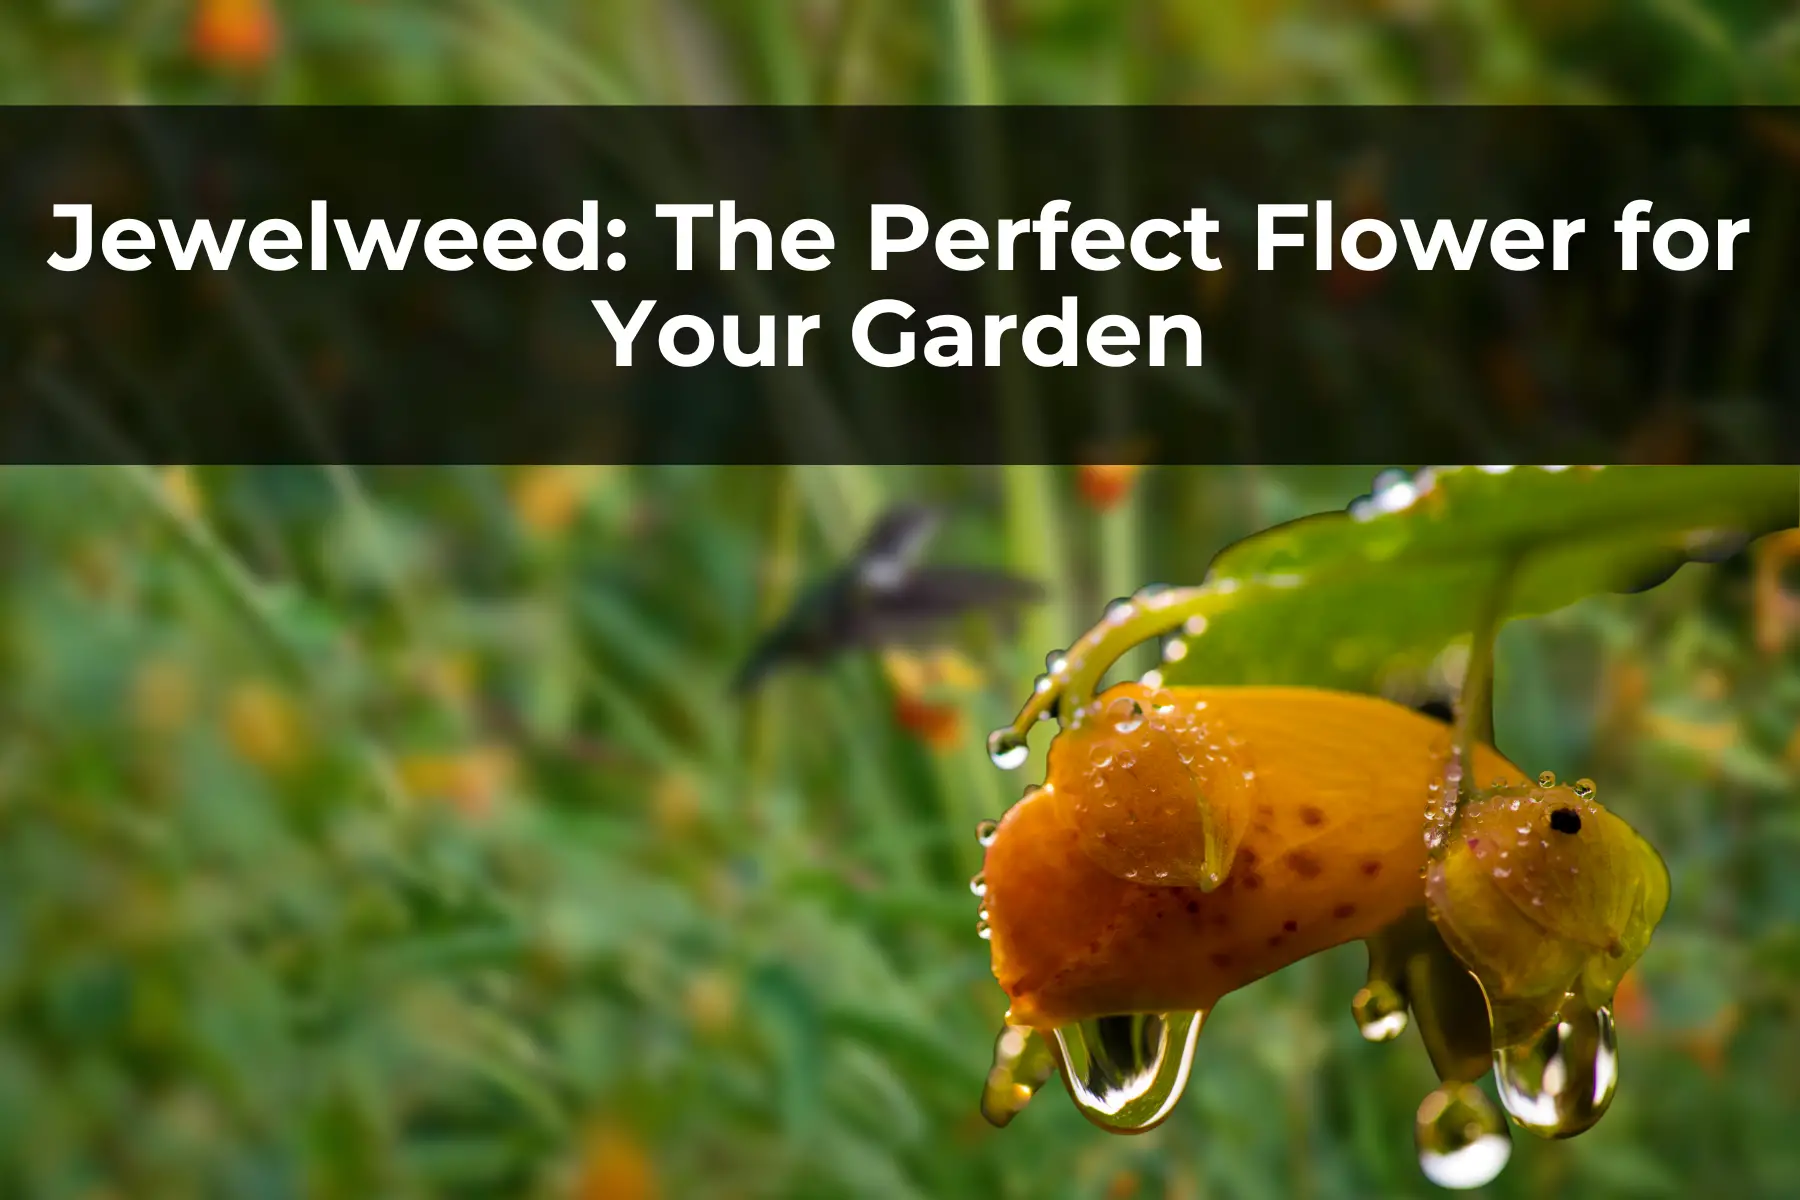 Jewelweed: The Perfect Flower for Your Garden